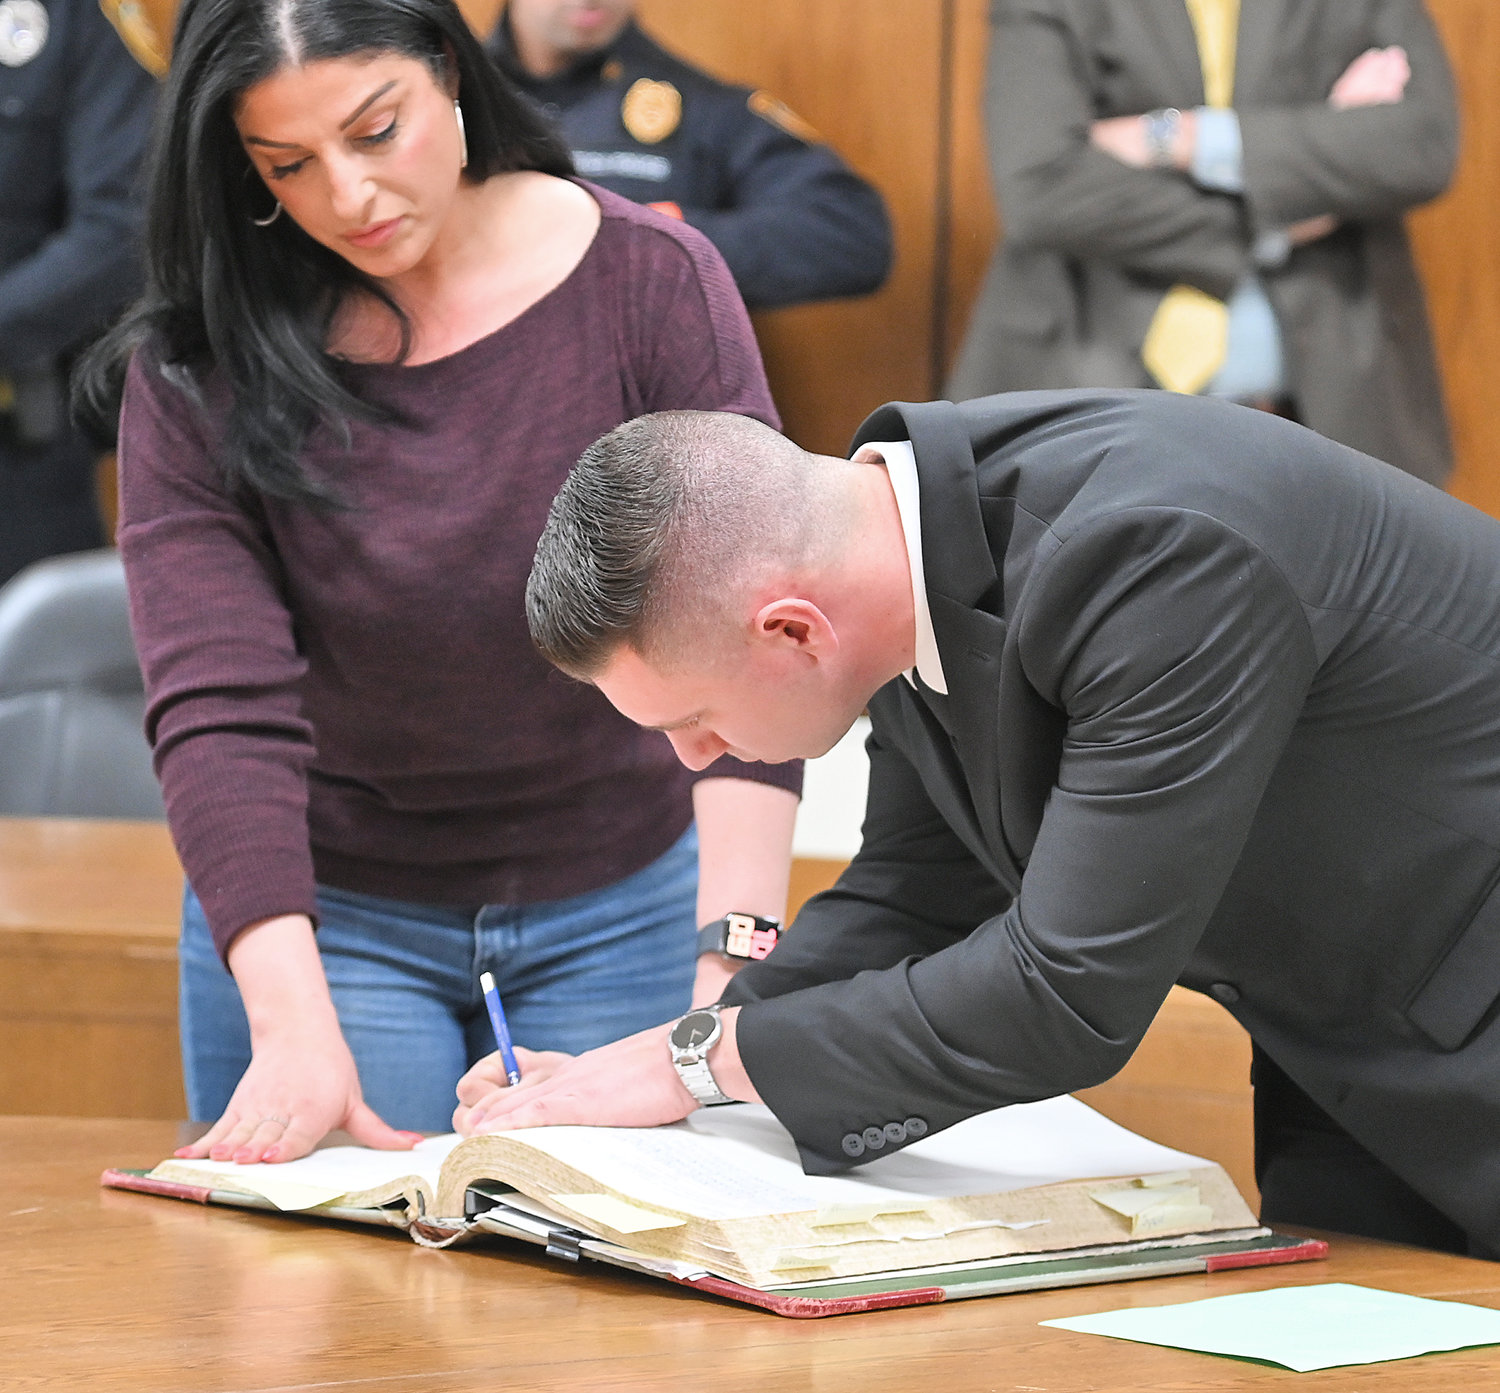 SIGNING IN — New recruit James Amuso signs the official Utica Police Department book, a longtime tradition for the agency for new members.